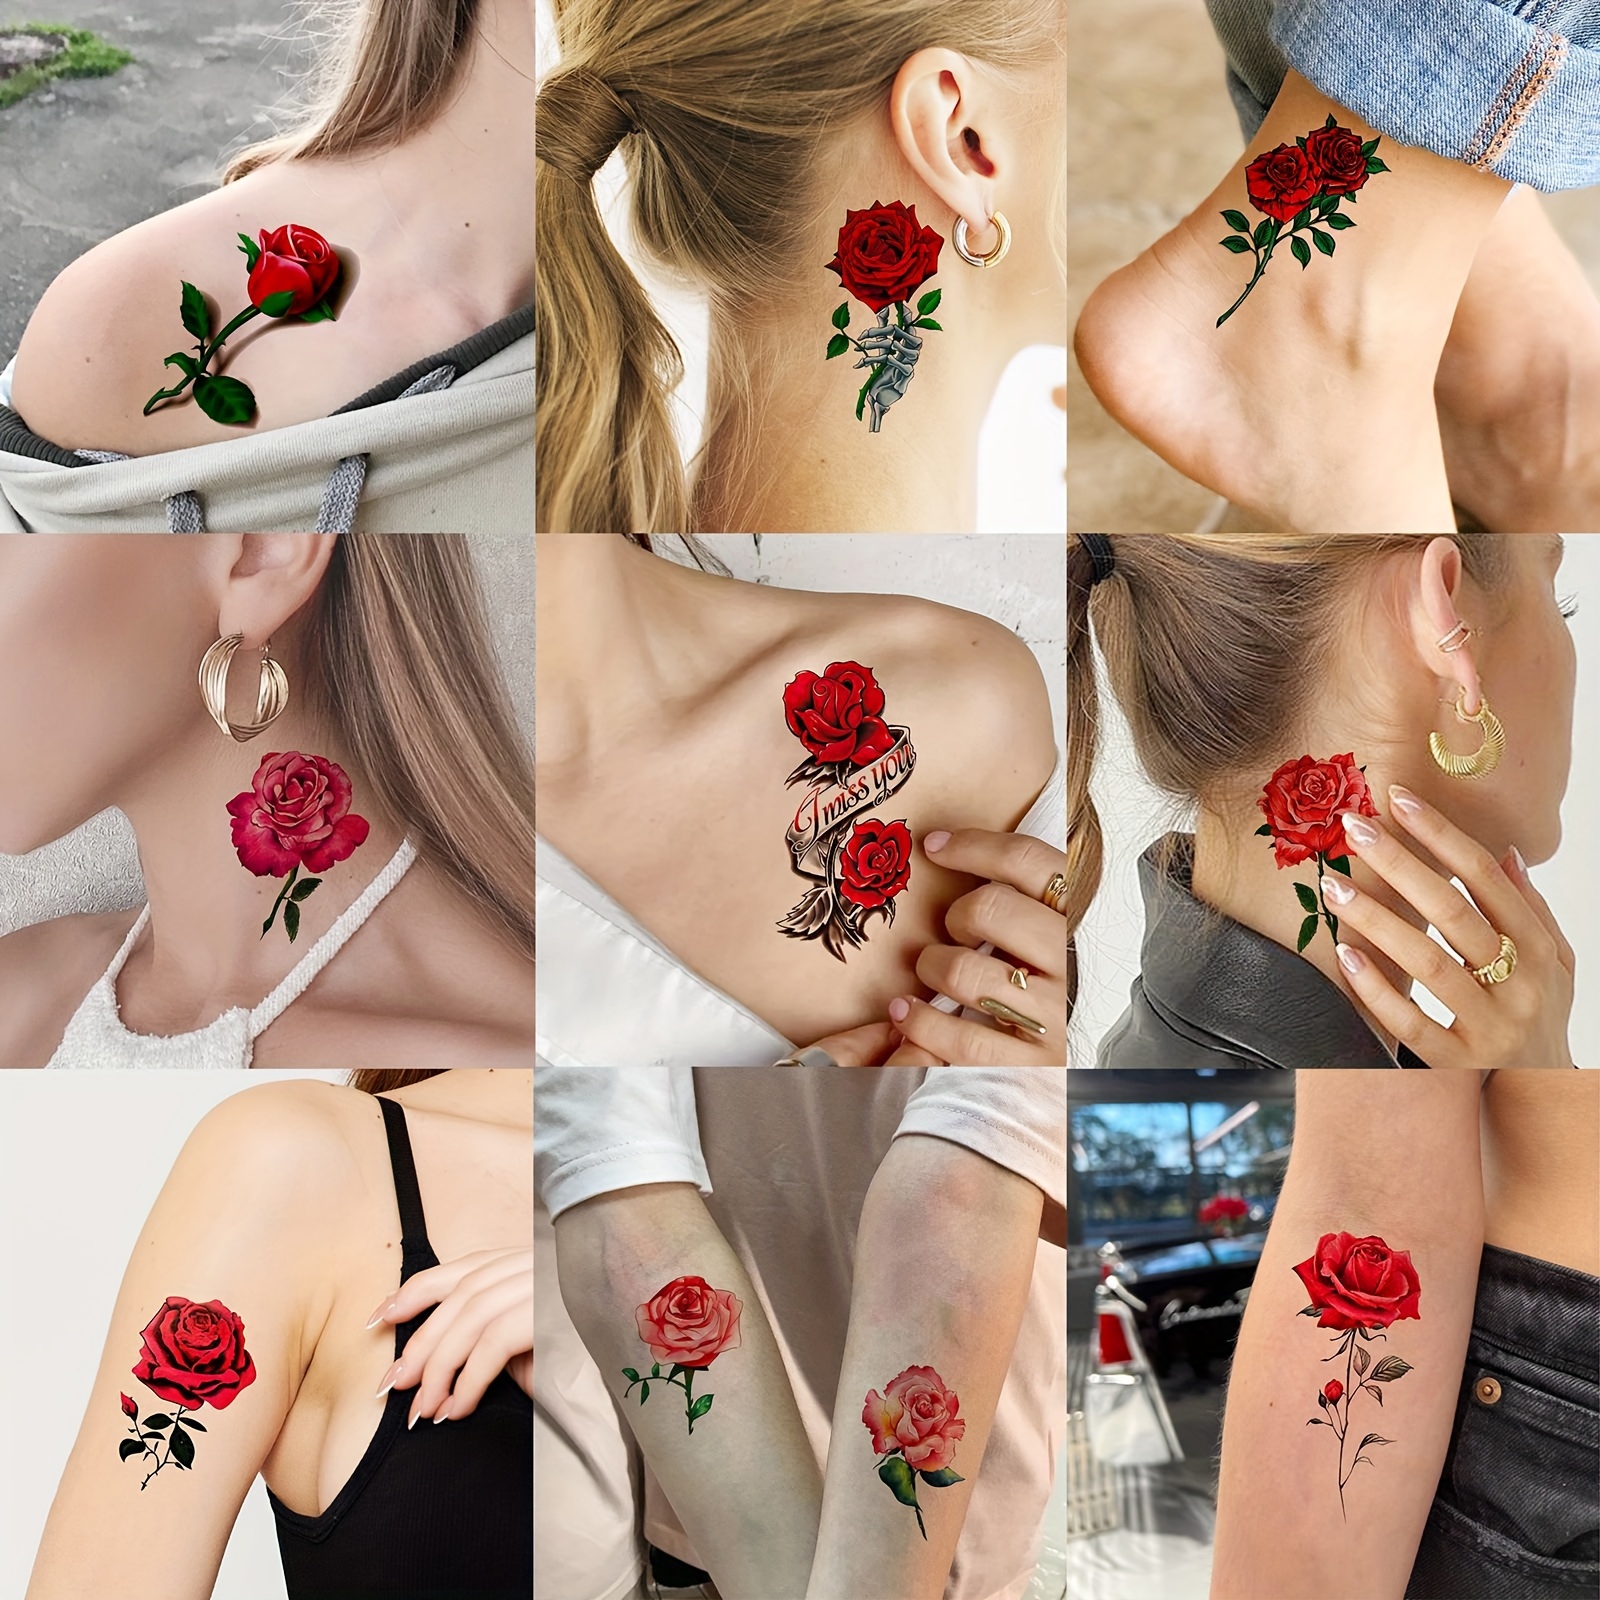 

24 Sheets Red Rose Temporary Tattoos For Women Neck Arm Girls Hands Legs, Waterproof Black Realistic Rose Flower Tattoo Stickers, 3d Peony Floral Body Art Fake Tattoos